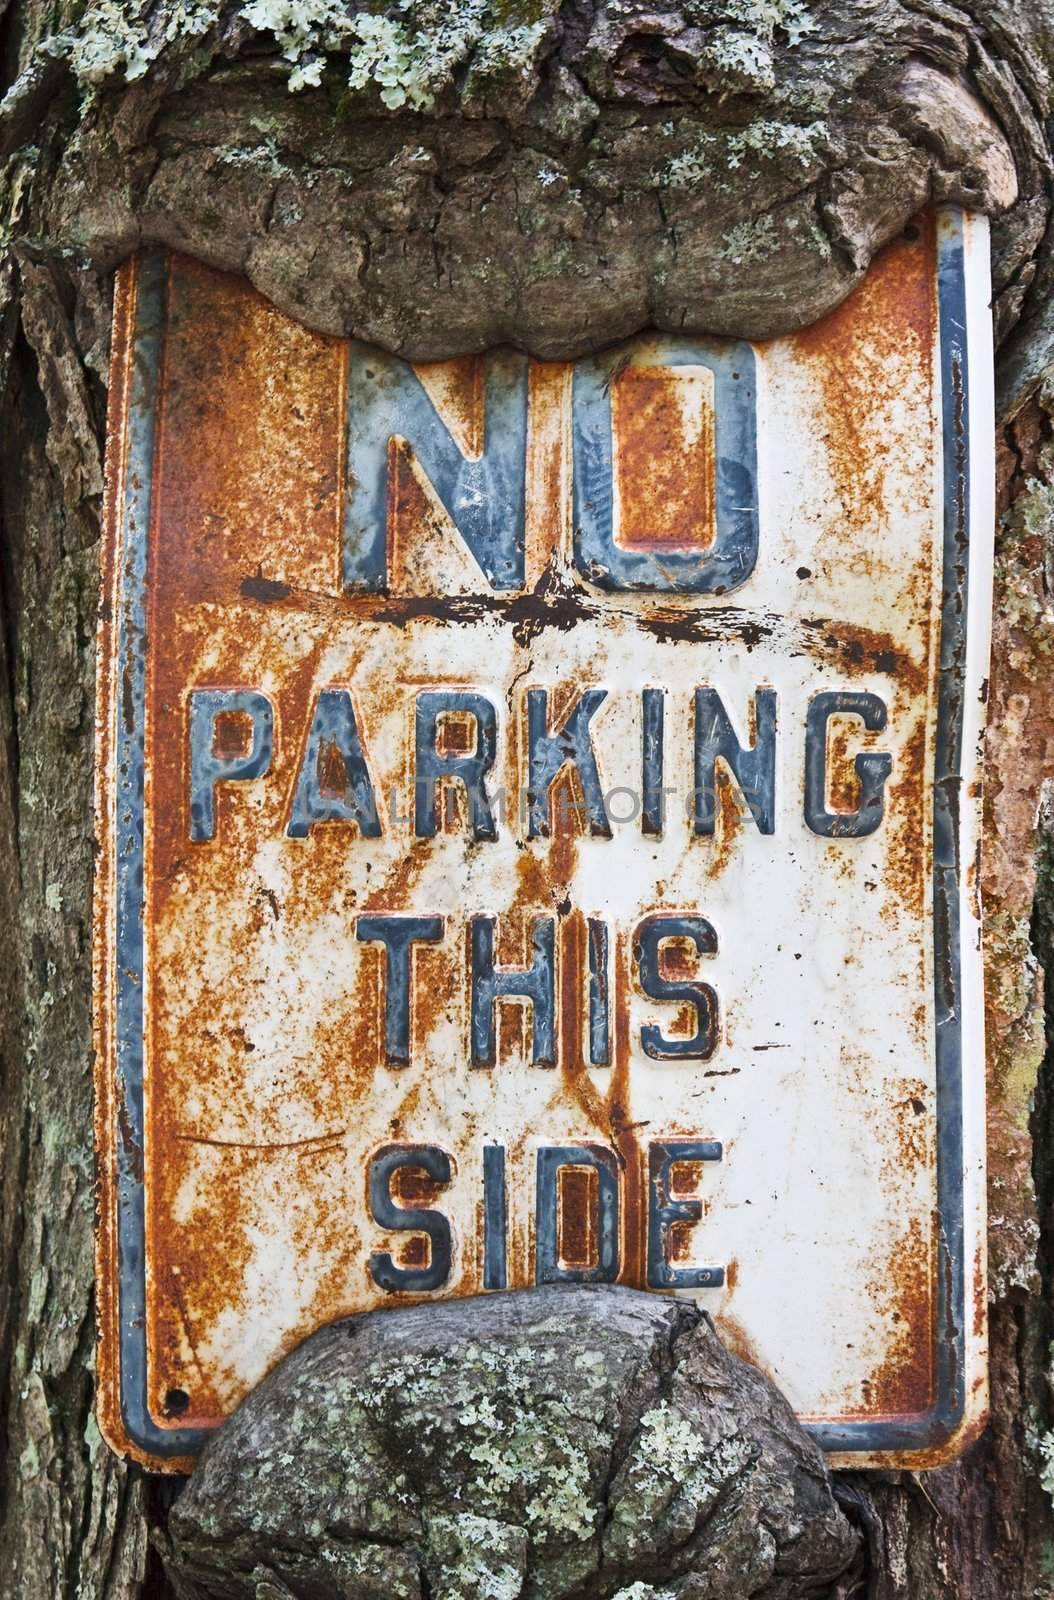 No Parking This Side by sbonk